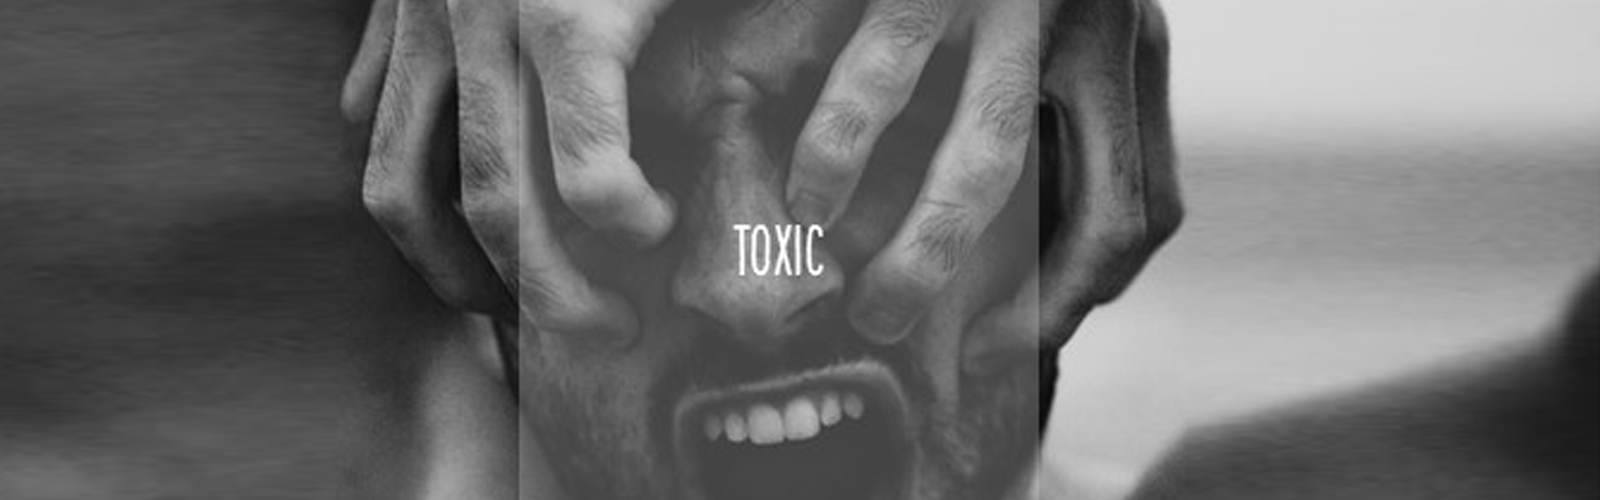 Black and White photo of people screaming with hands covering his eyes and text saying toxic